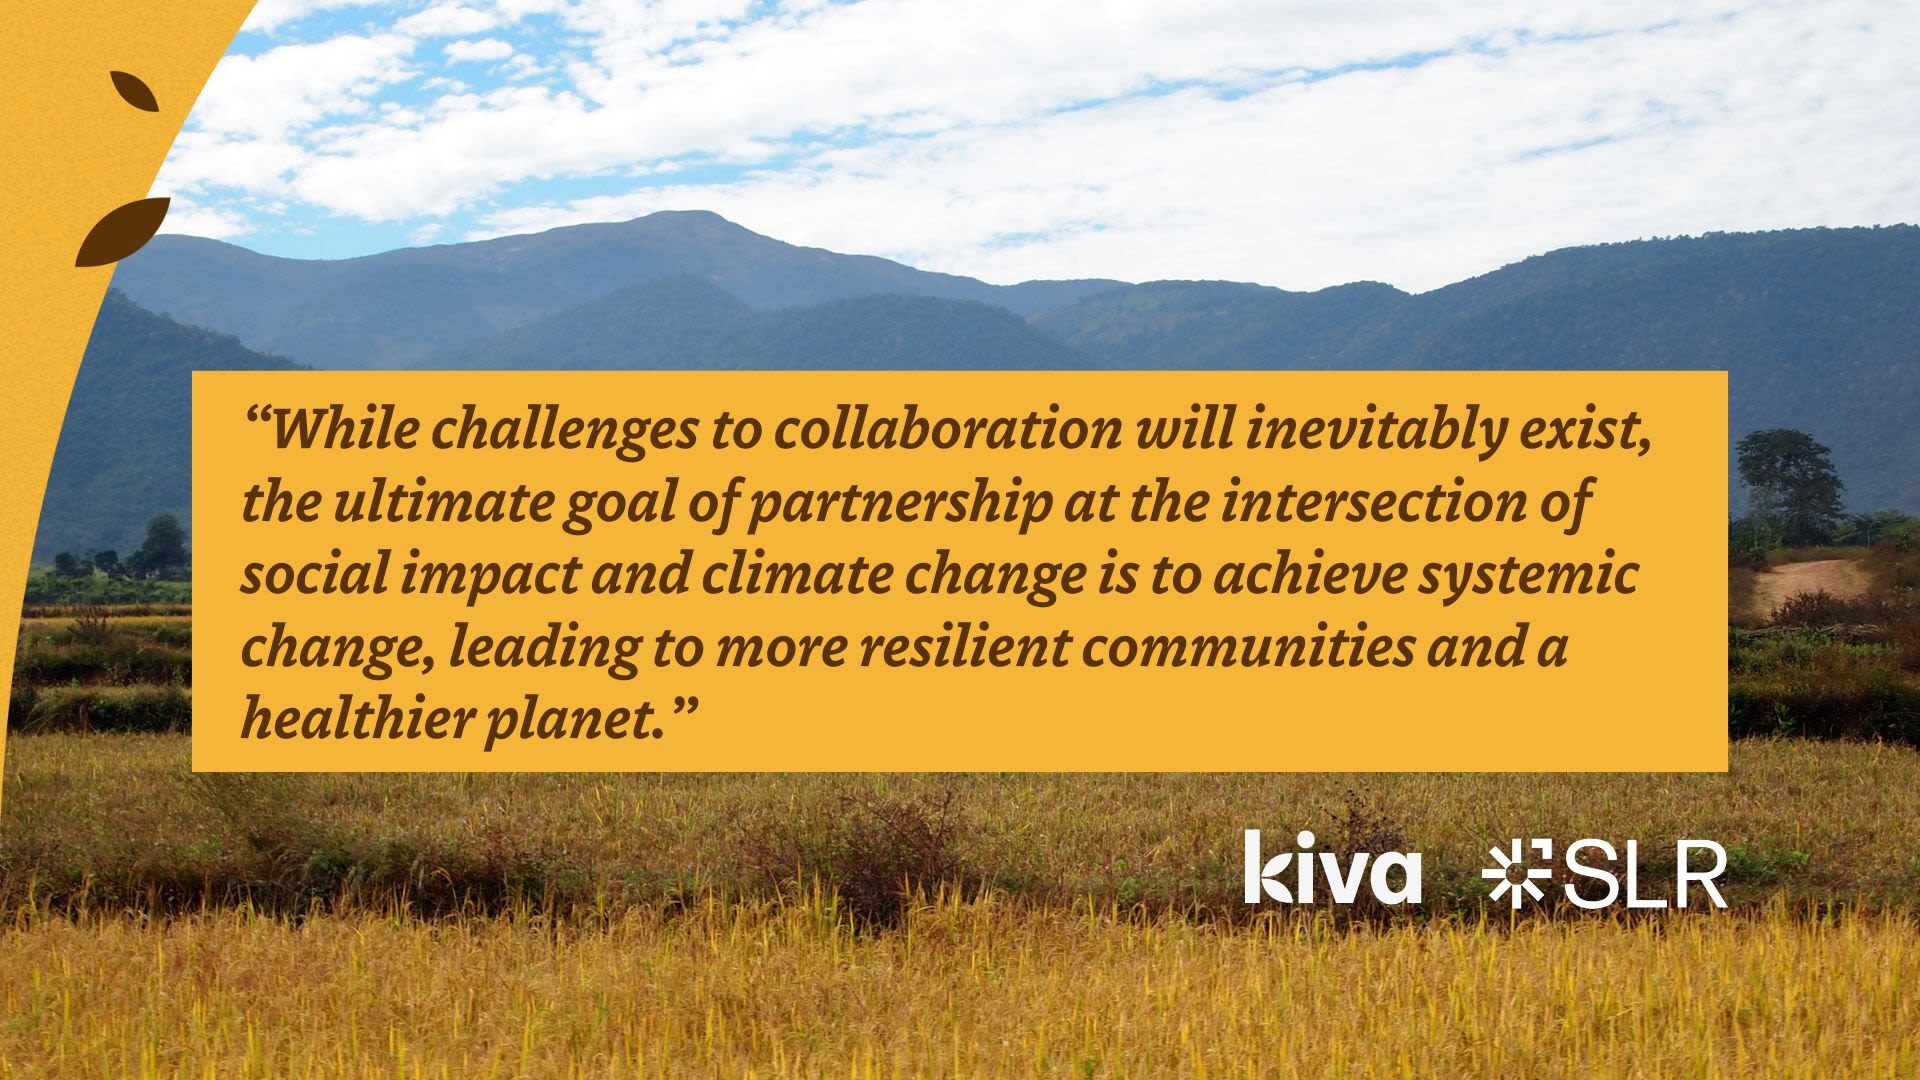 Quote image: "While challenges to collaboration will inevitably exist, the ultimate goal of partnership at the intersection of social impact and climate change is to achieve systemic change, leading to more resilient communities and a healthier planet."